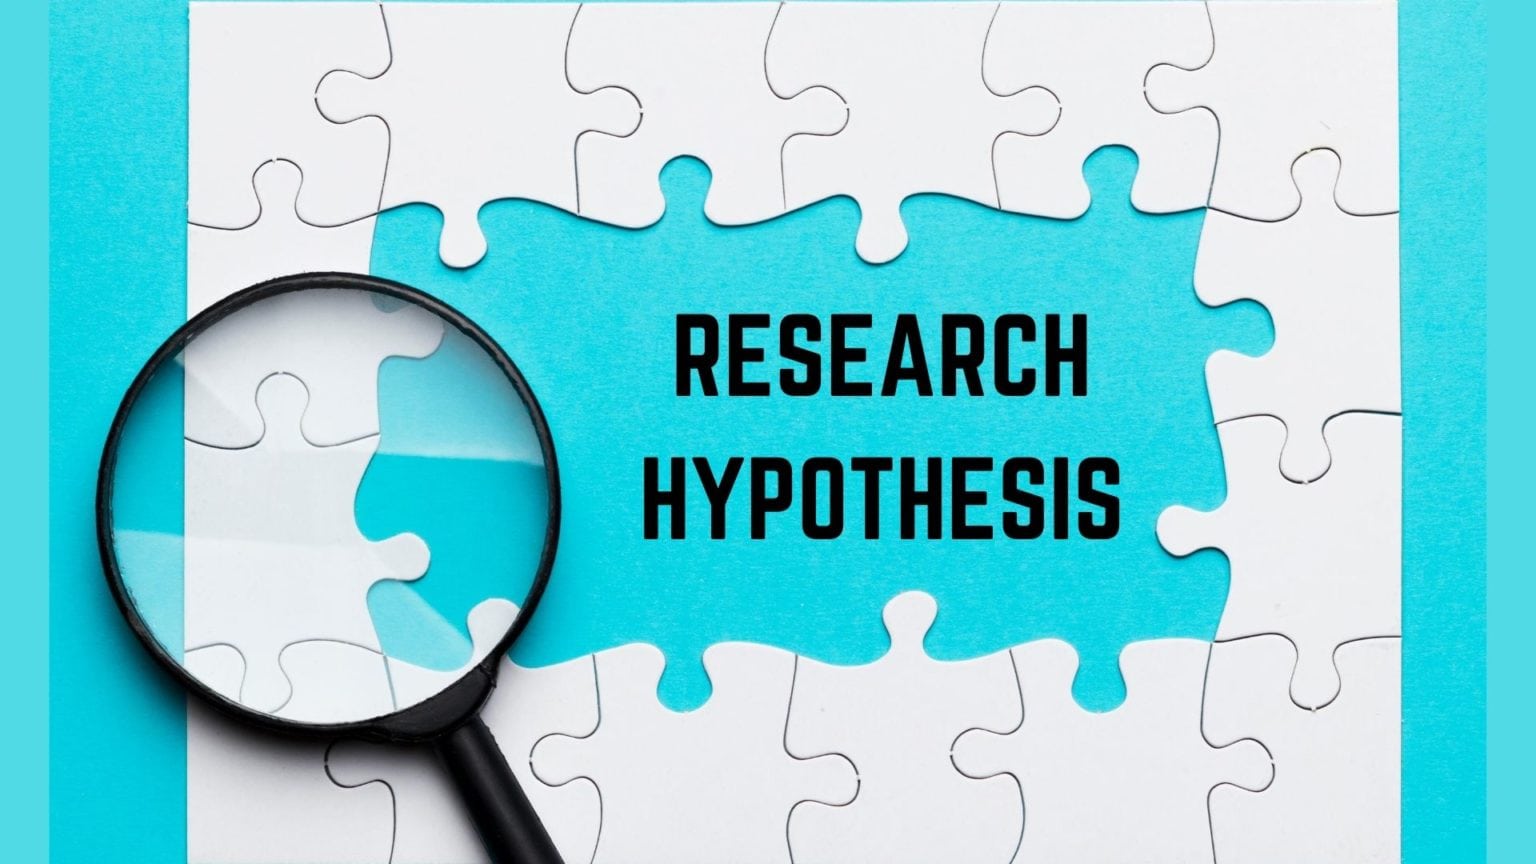 hypothesis of research